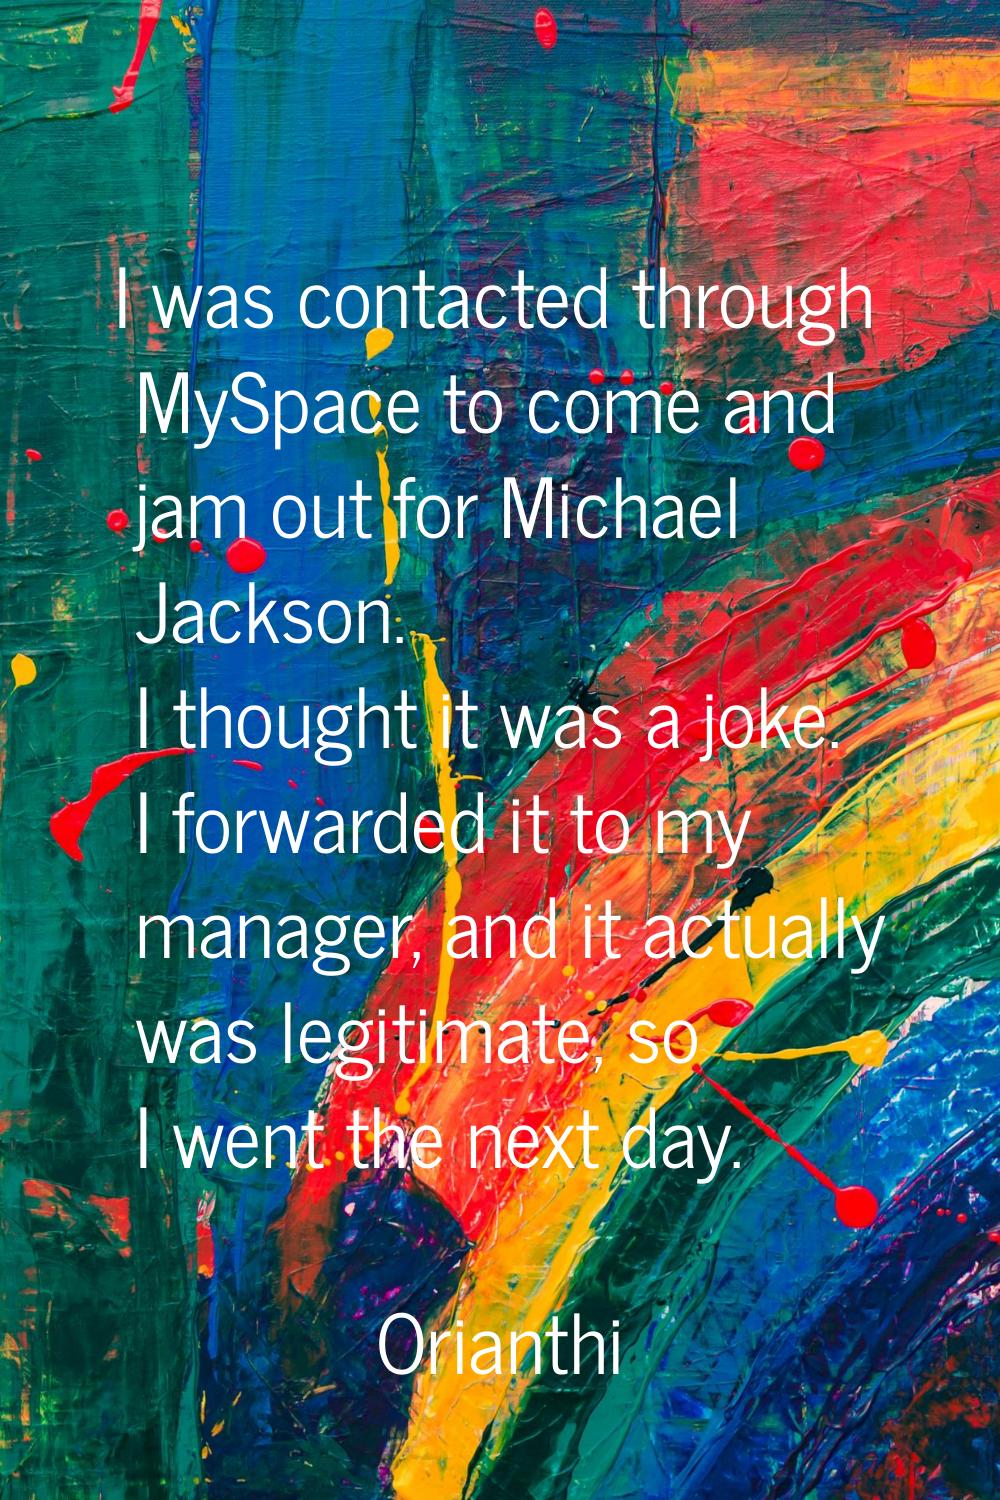 I was contacted through MySpace to come and jam out for Michael Jackson. I thought it was a joke. I